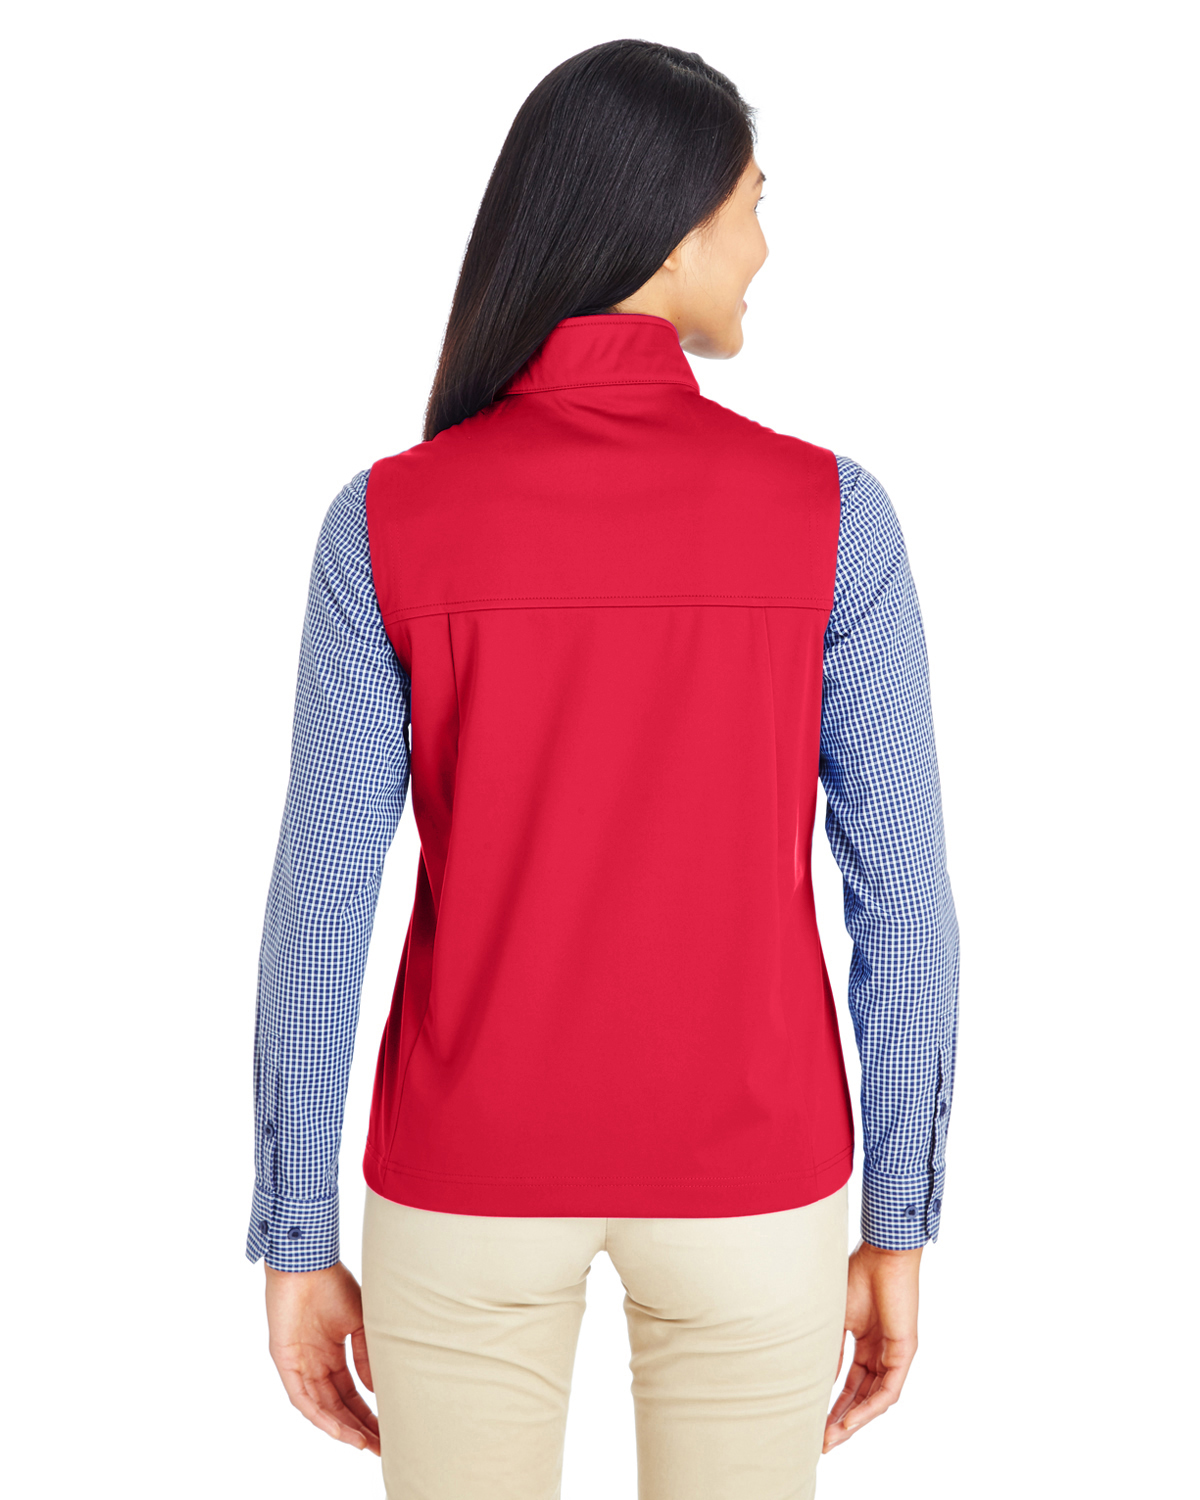 Ladies' Techno Lite Three-Layer Knit Tech-Shell Quarter-Zip Vest - CLASSIC RED - S - image 2 of 3